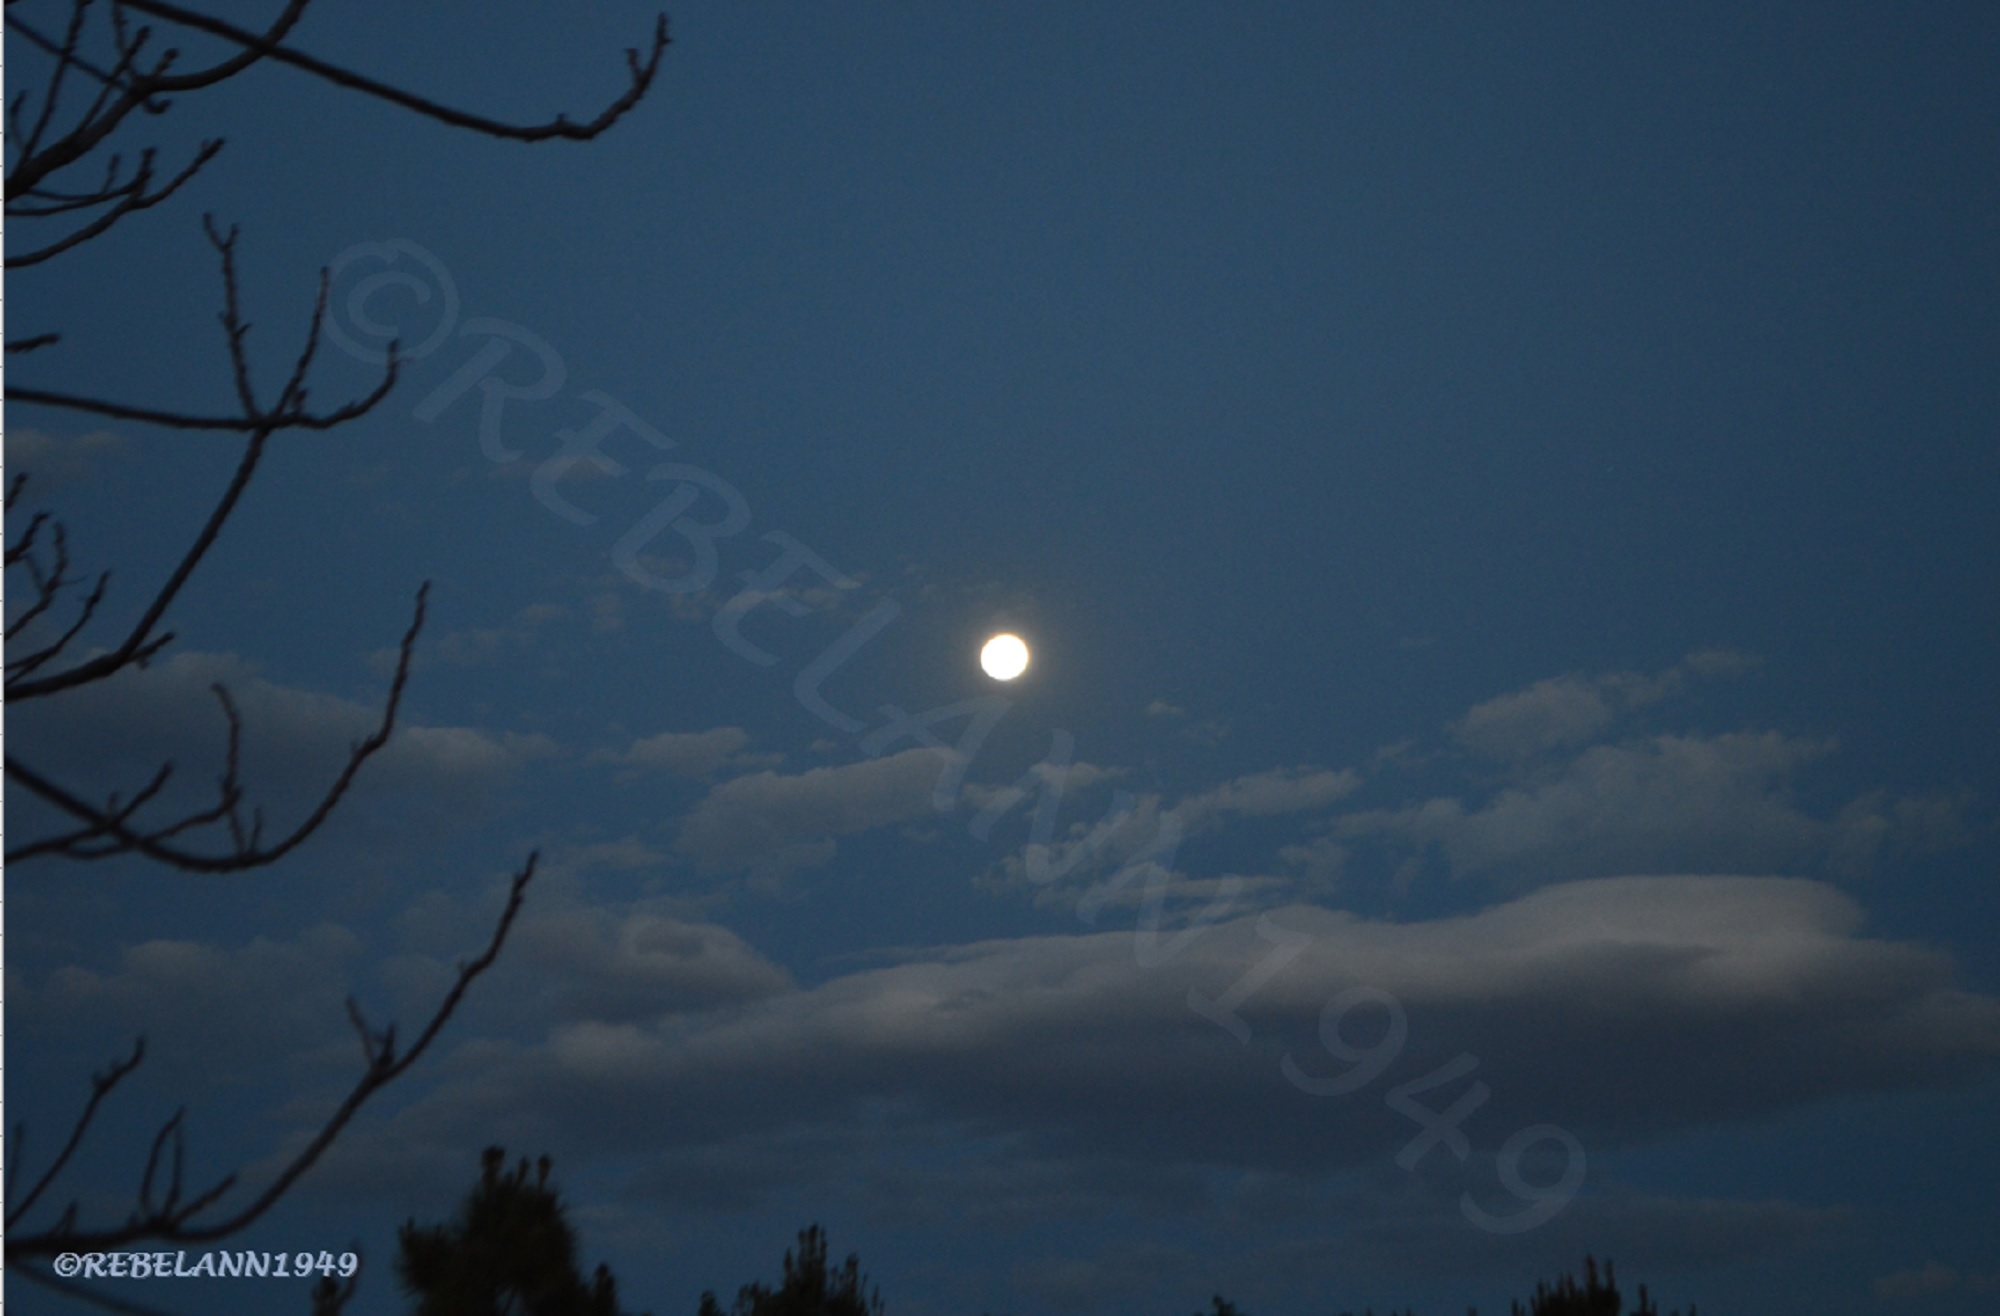 End of April full moon, yepper, I took this.